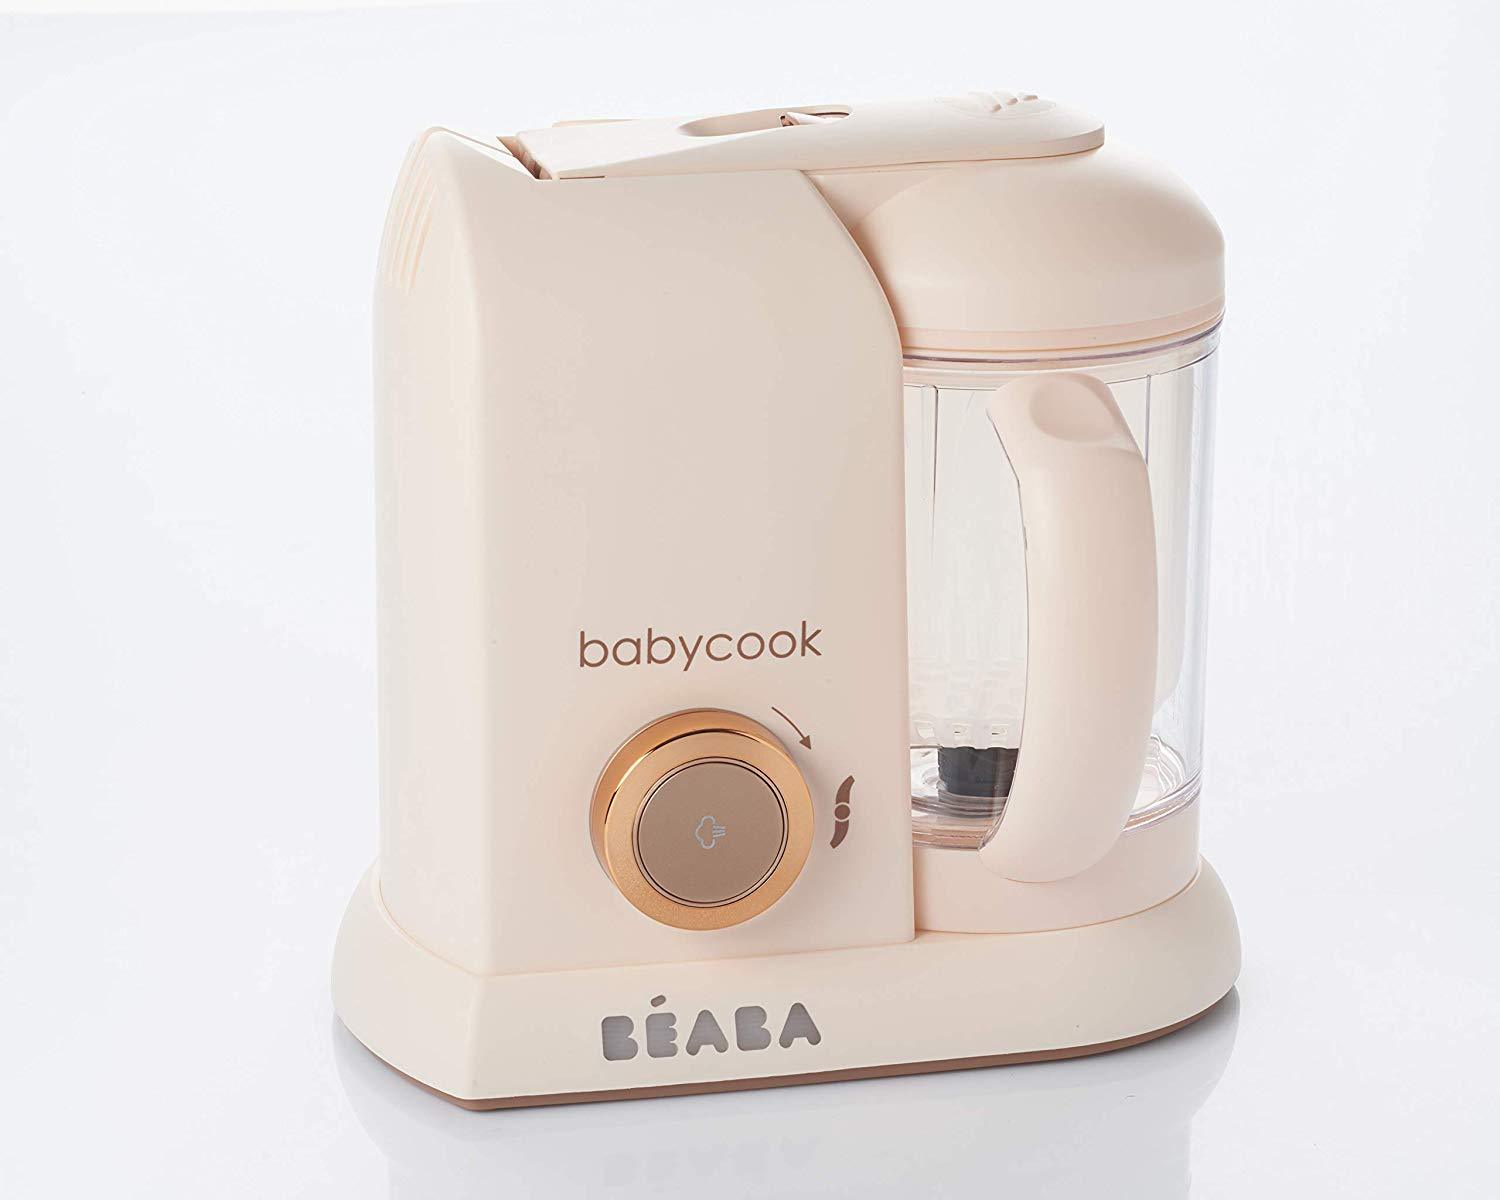 Beaba Babycook® MACARON Collection Rose Gold Anne Claire Baby Store 